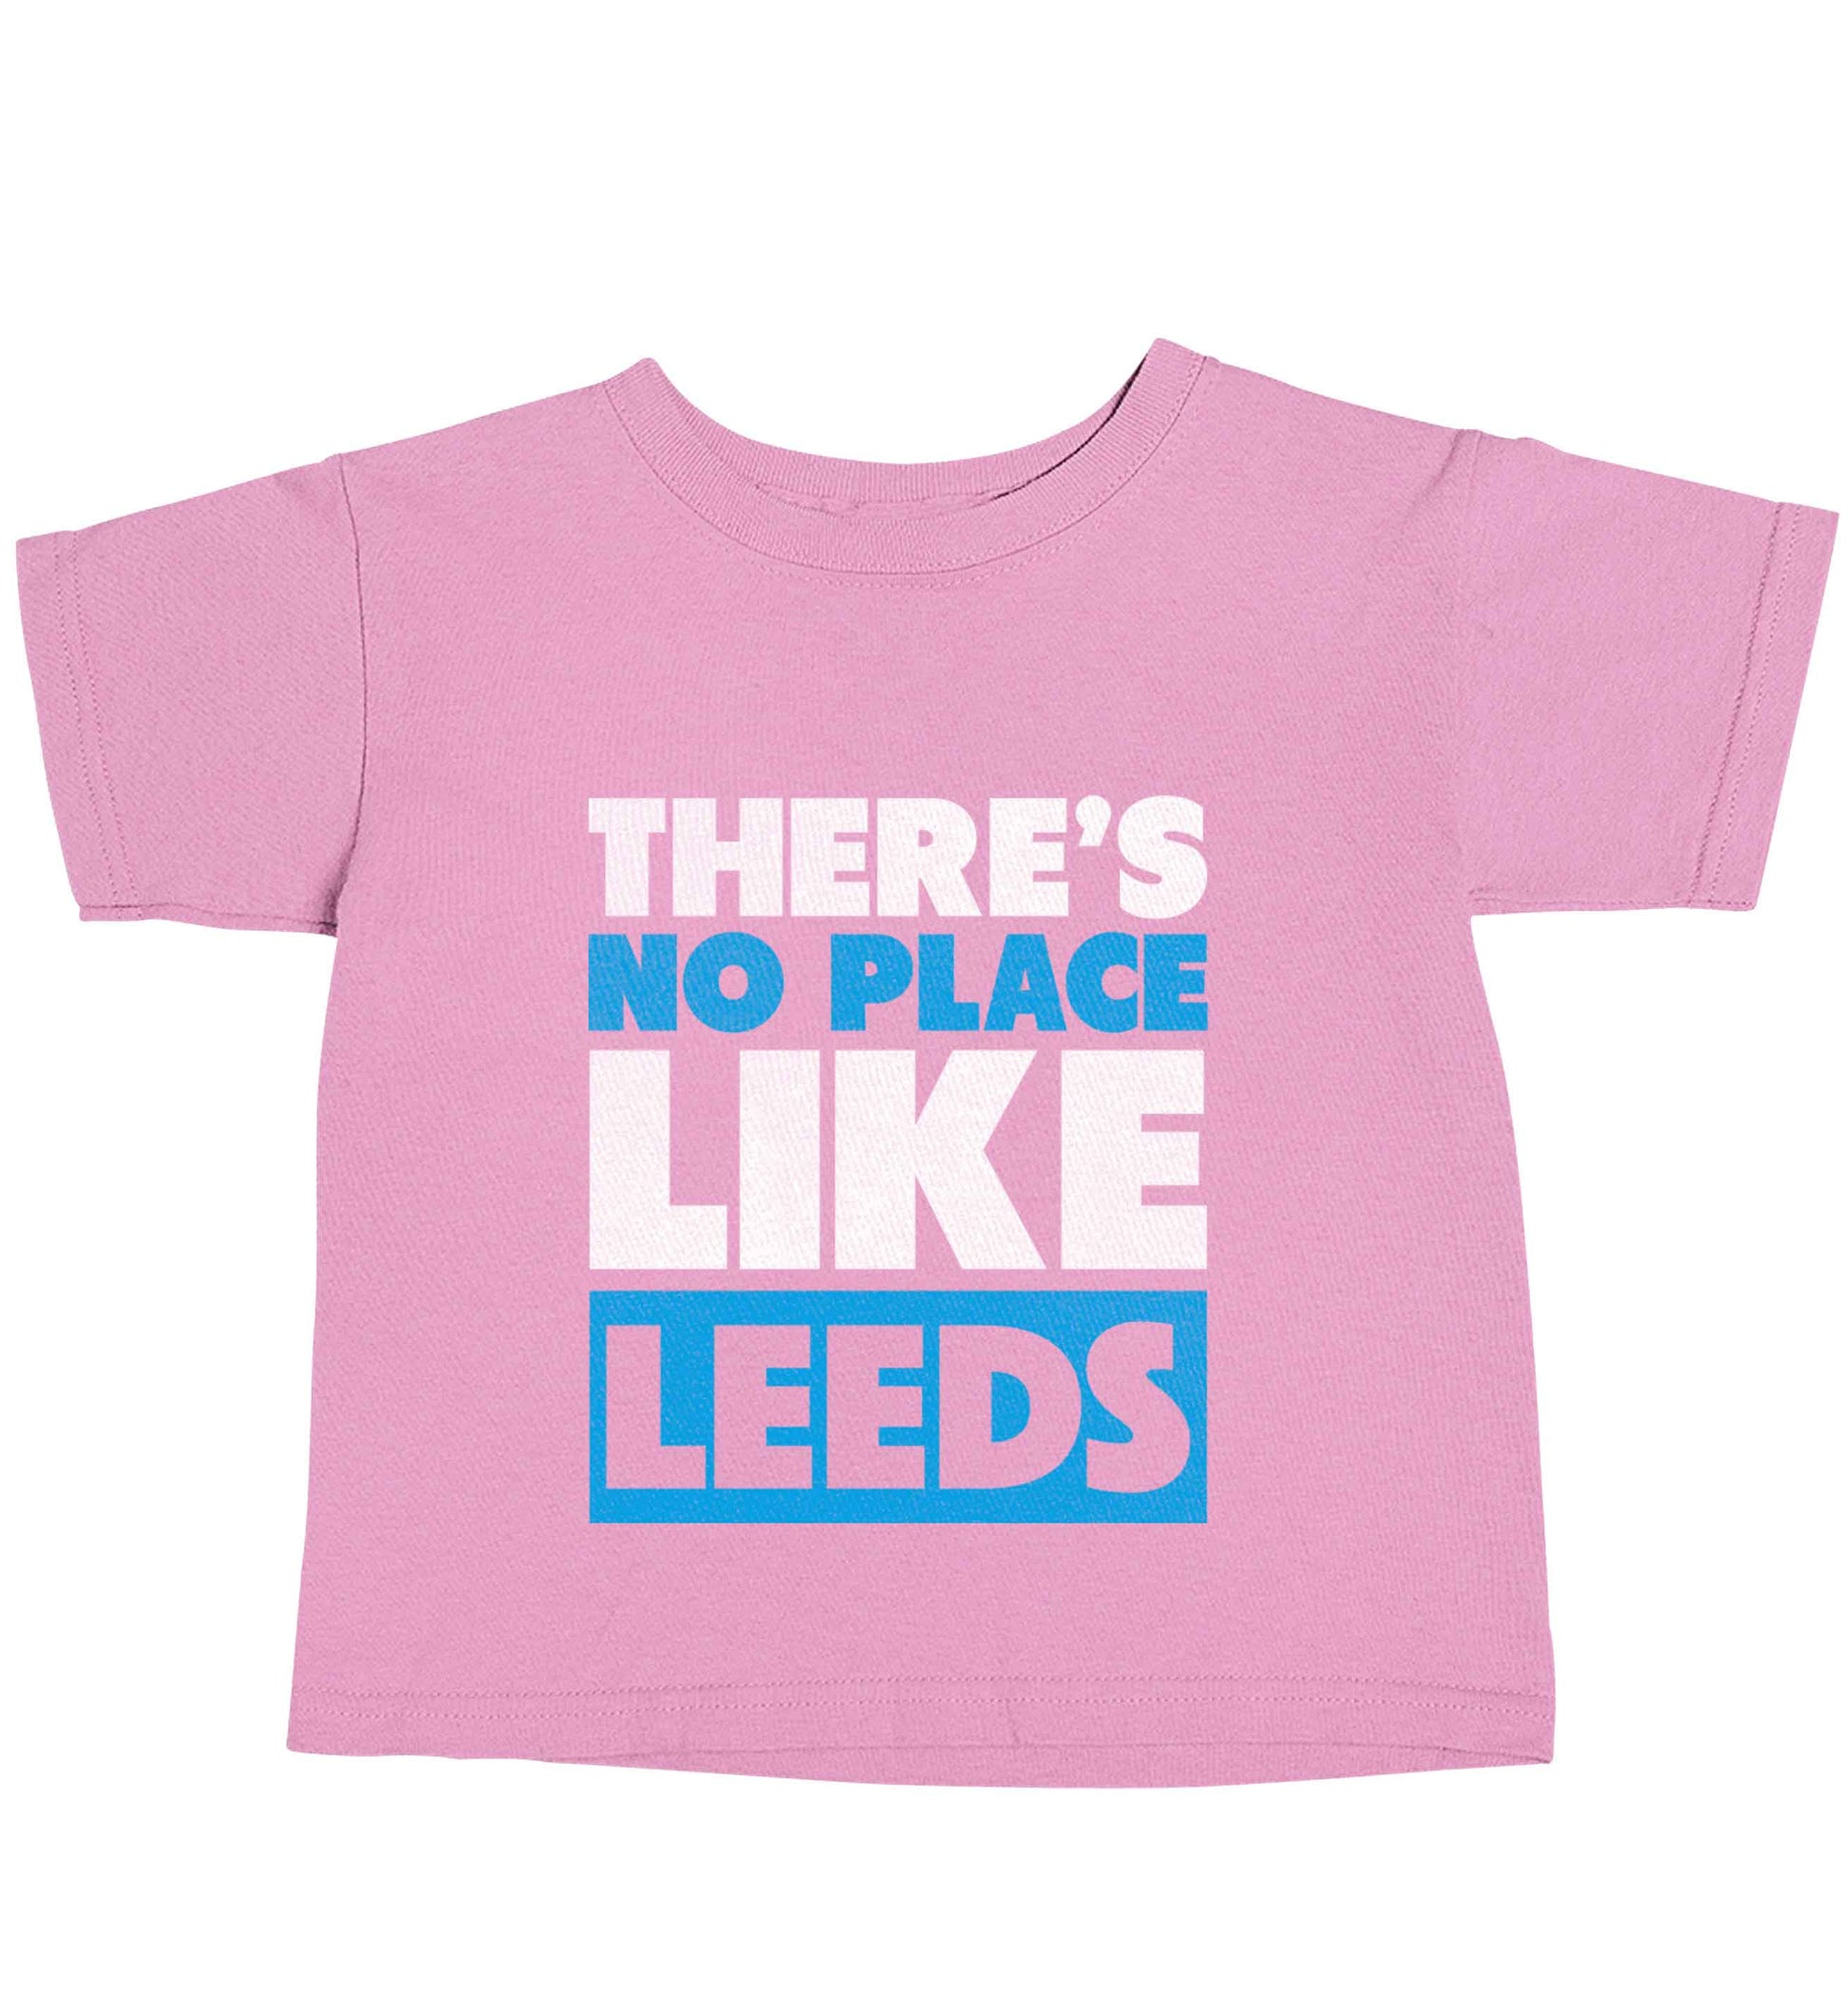 There's no place like Leeds light pink baby toddler Tshirt 2 Years